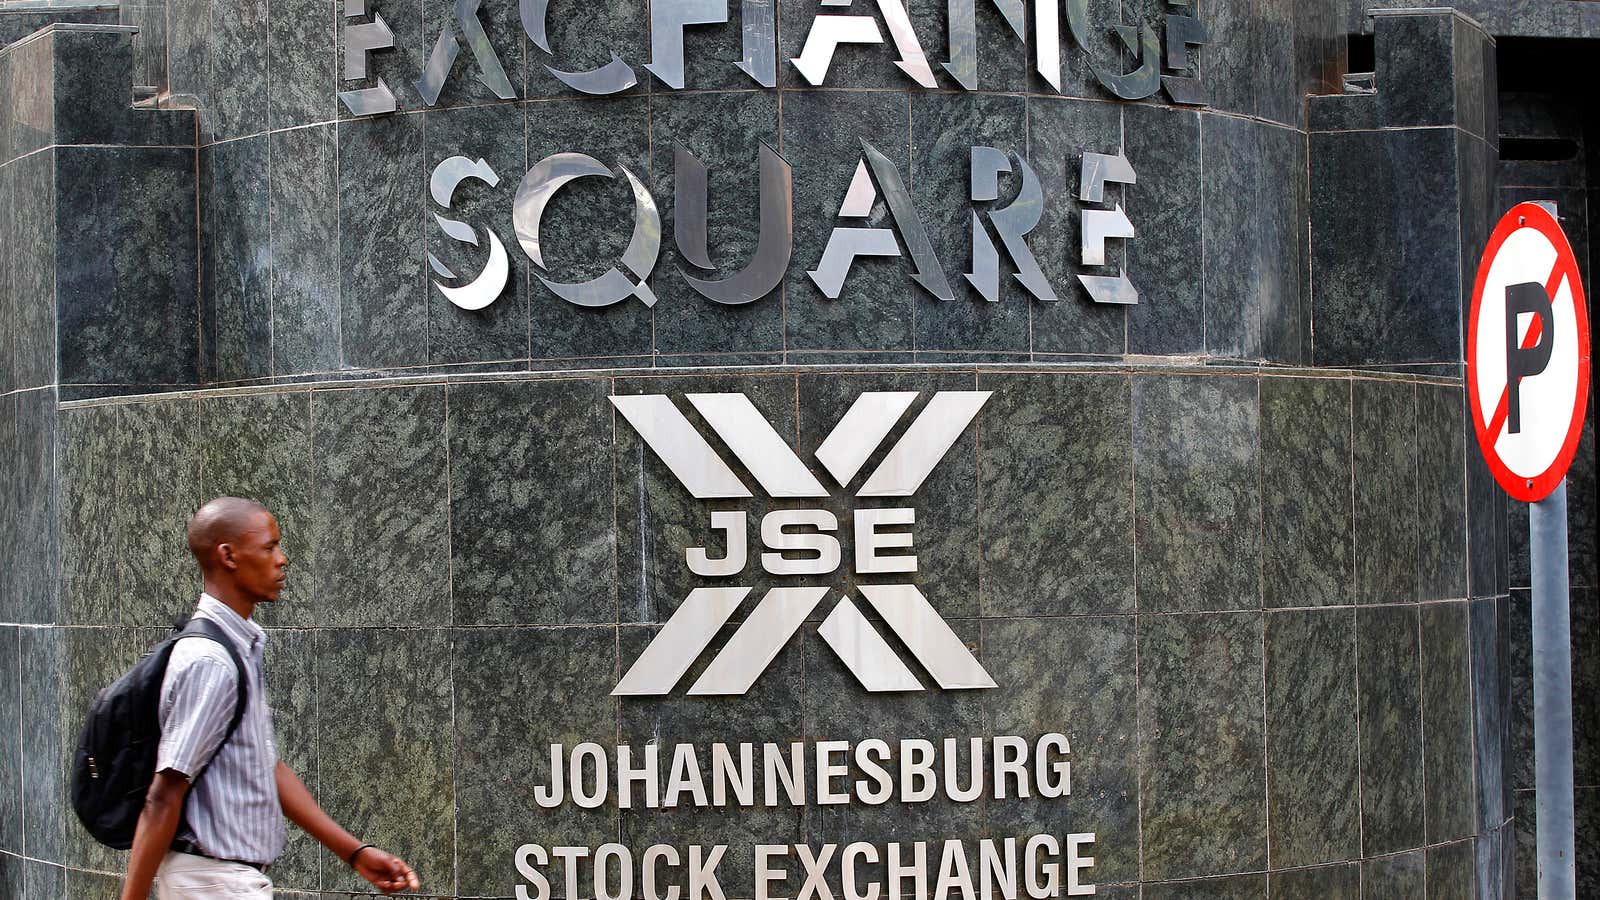 A man walks past the Johannesburg Stock Exchange building in Sandton December 6, 2012. South Africa’s black majority directly owns less than 10 percent of…